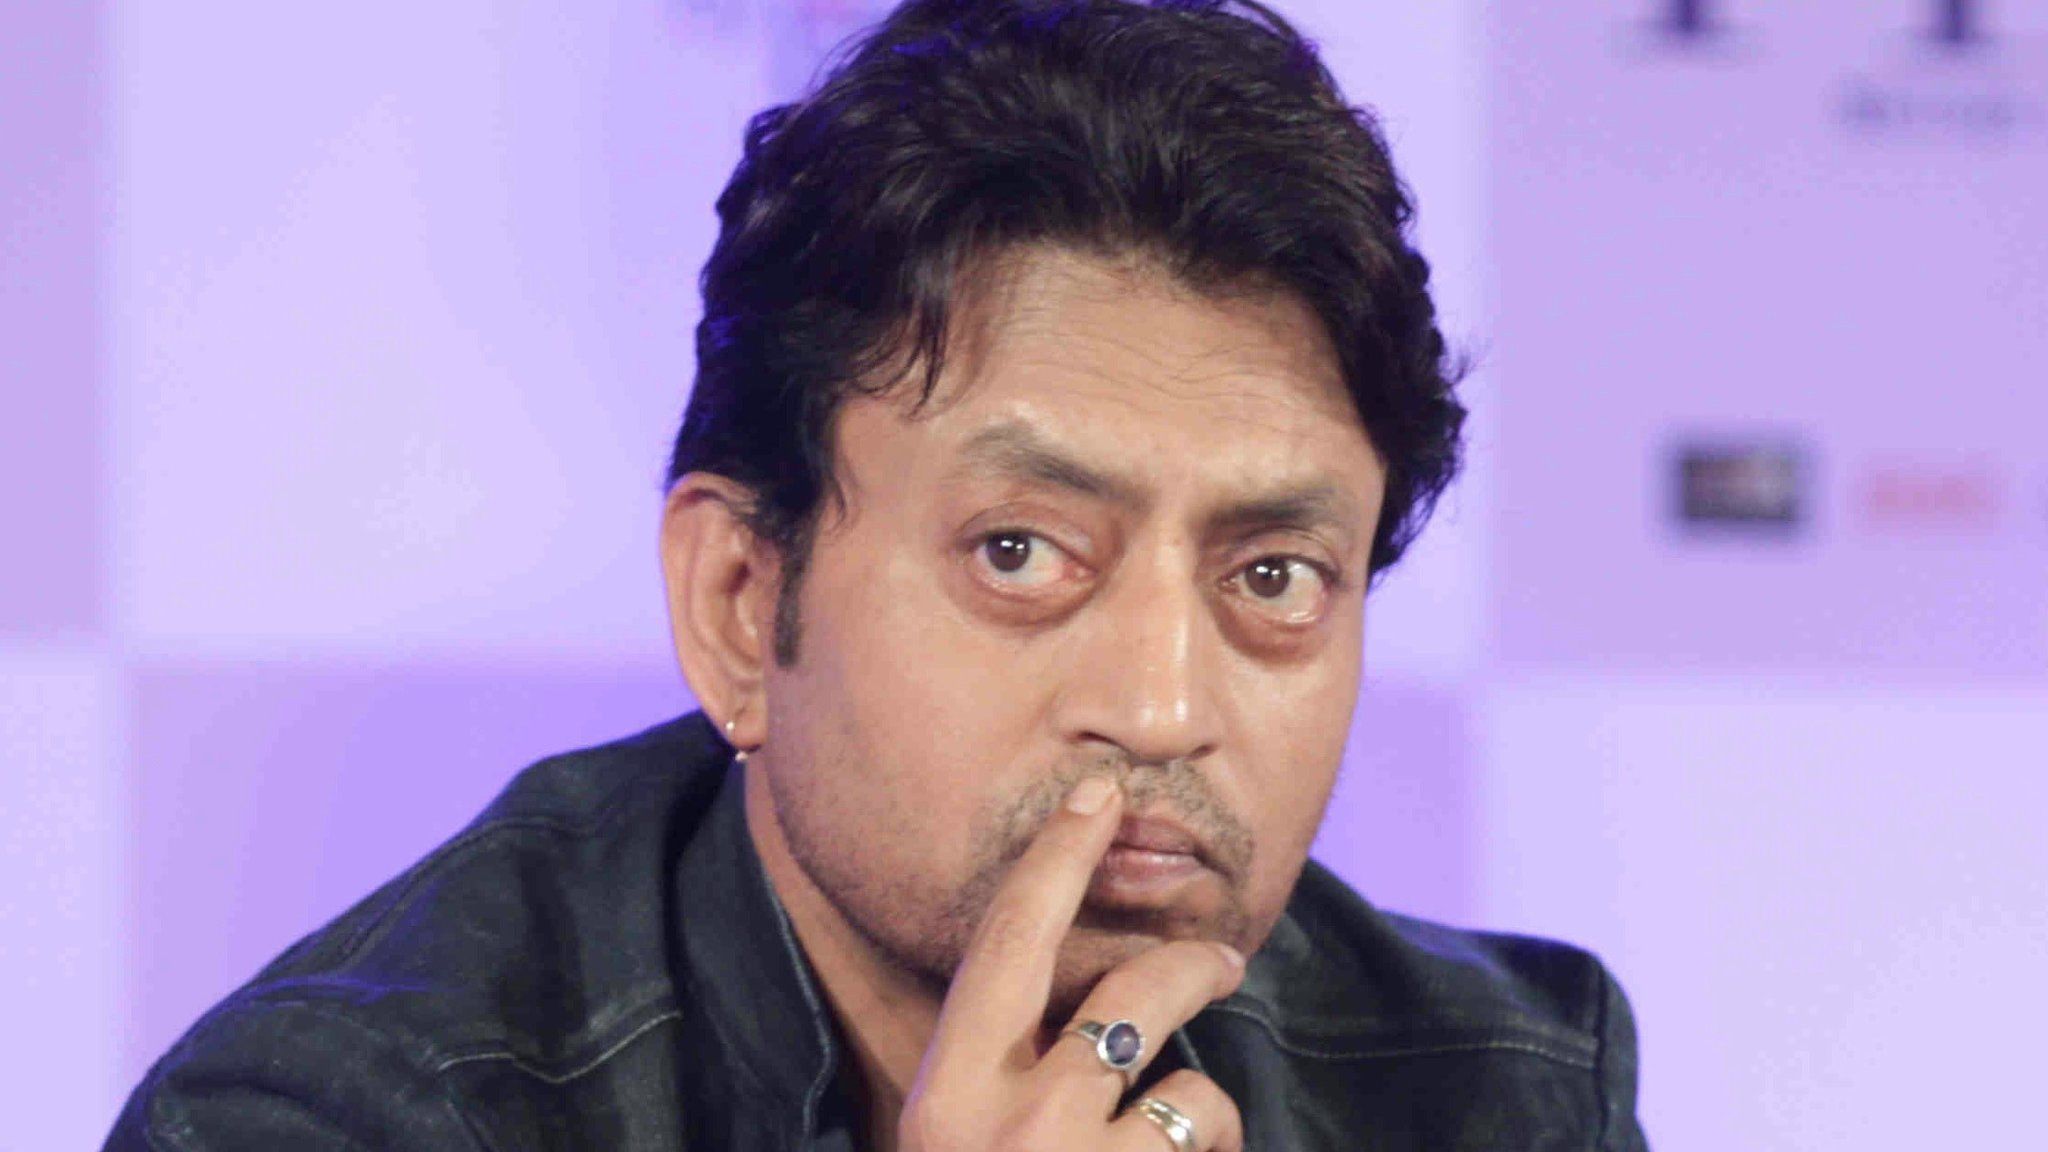 Indian Bollywood actor Irrfan Khan poses during a promotional event ahead of the forthcoming Hindi film Piku in Mumbai late April 28, 201